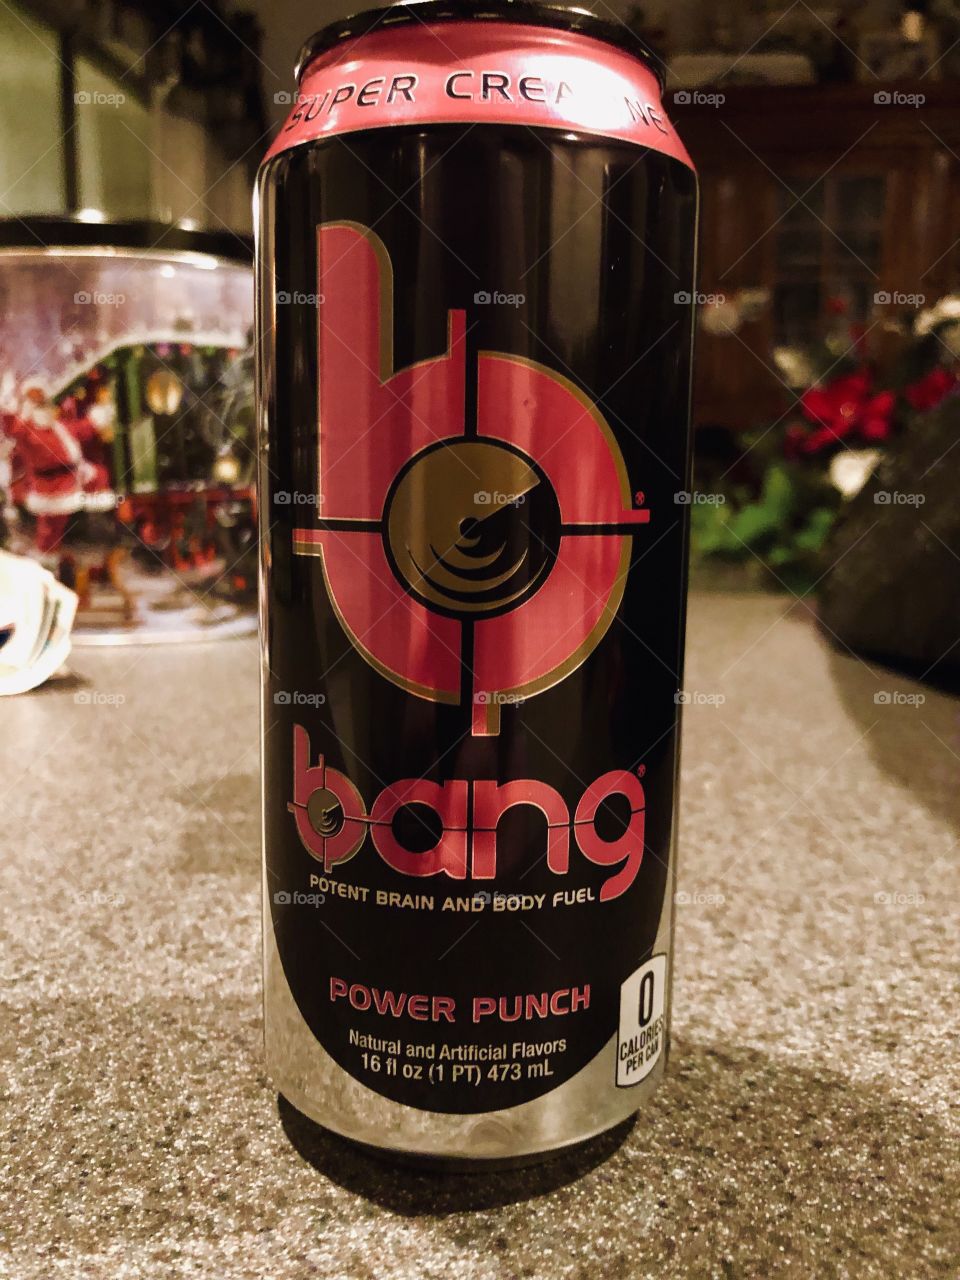 Sometimes in life, you might need to start with a bang. Packs a powerful punch and helps energize you.